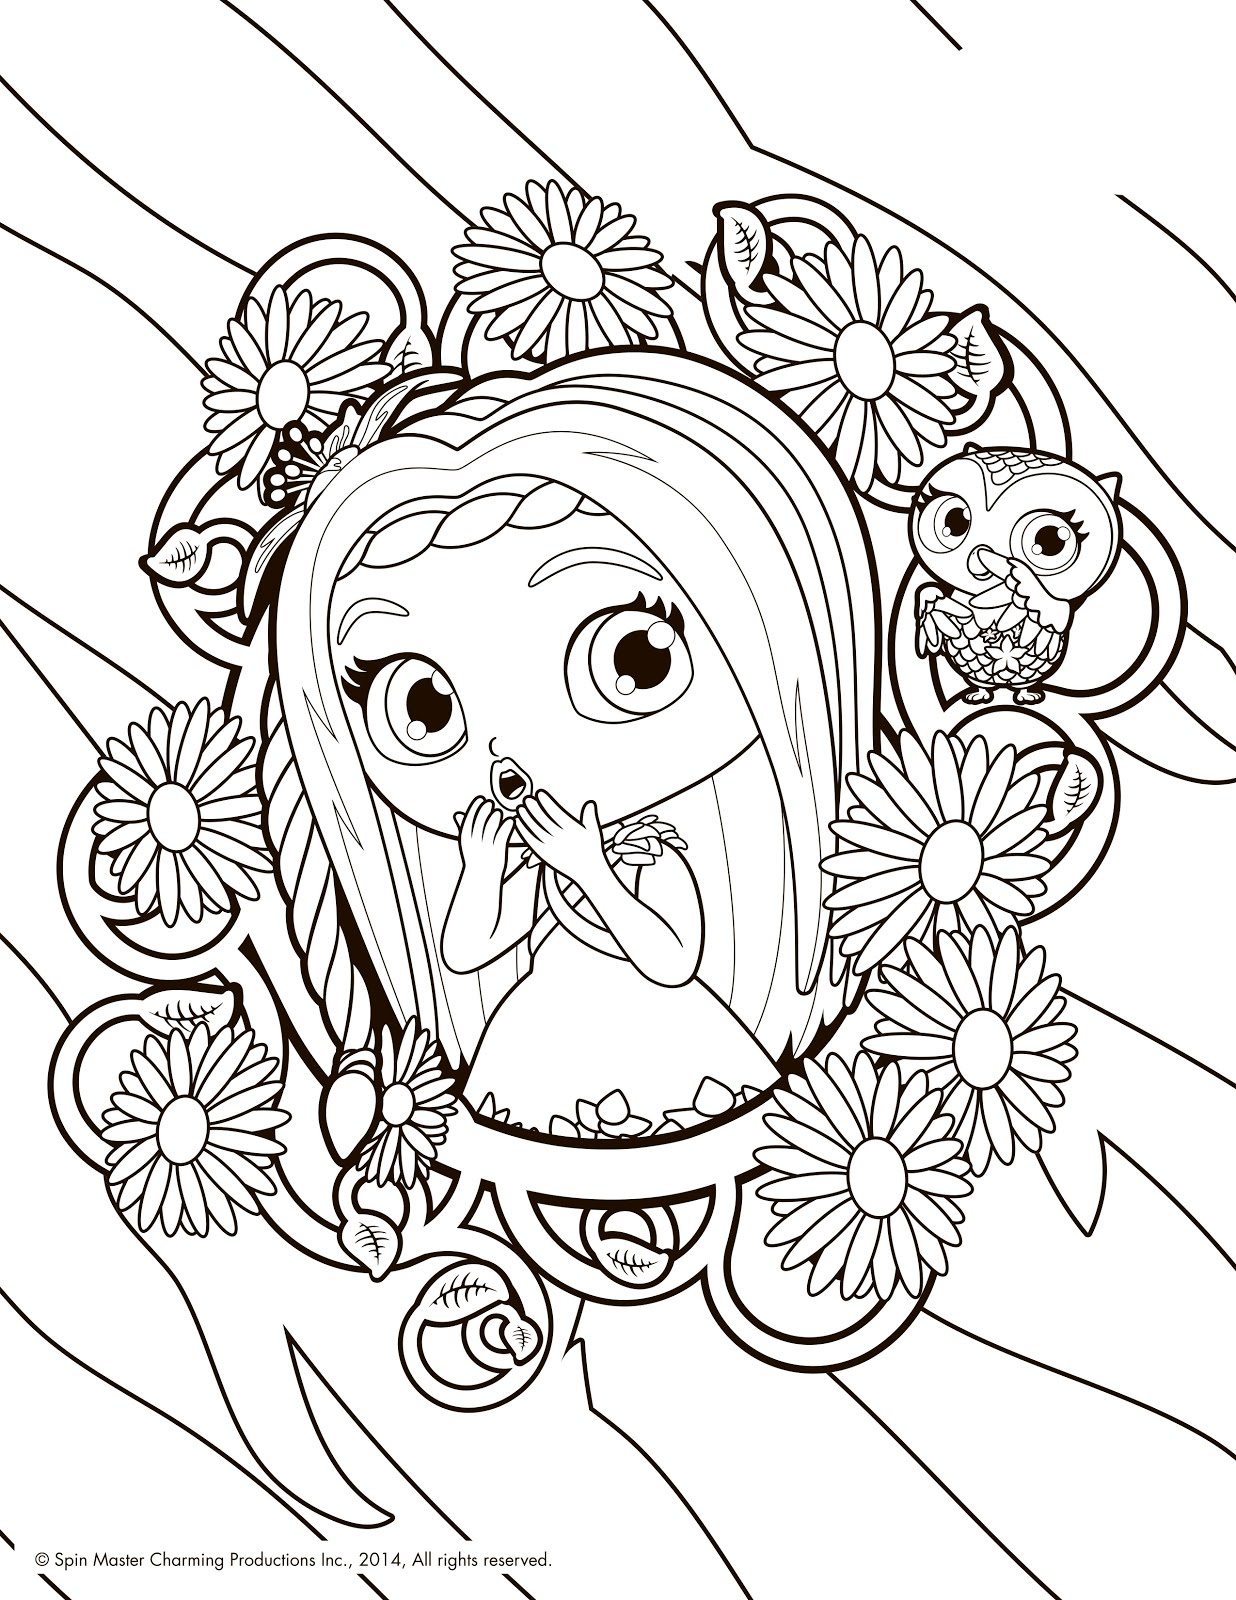 Little Charmers Coloring Pages